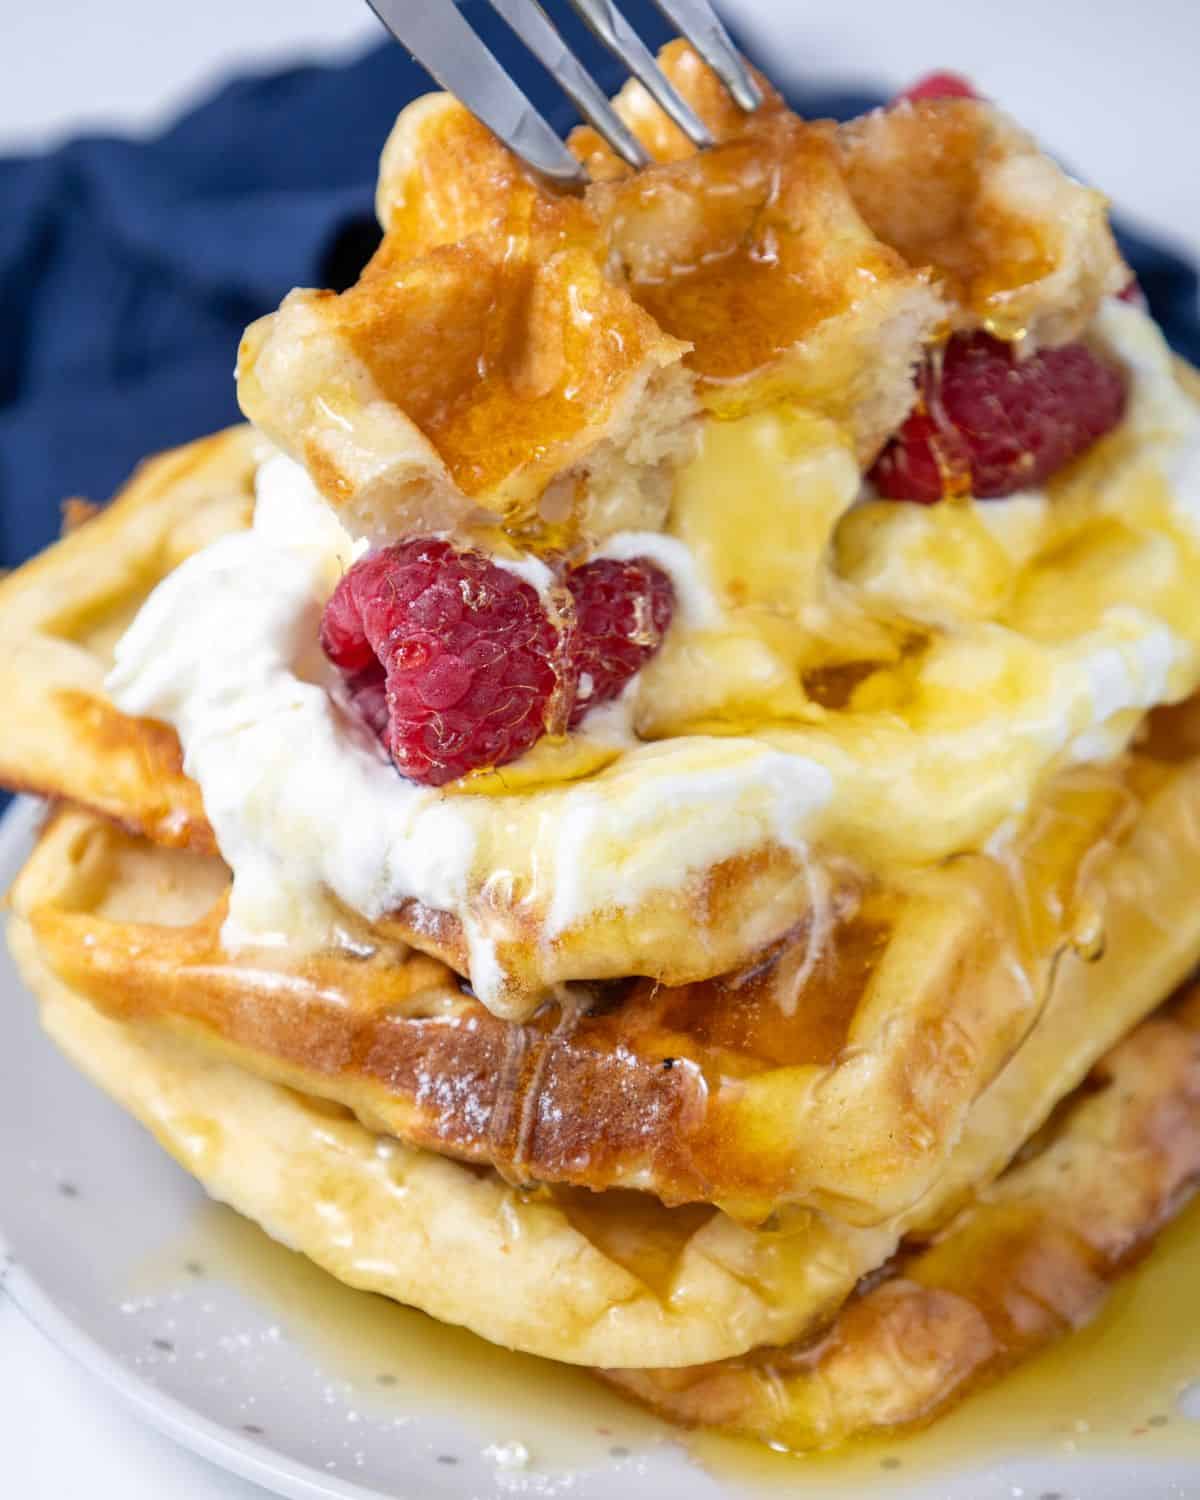 A stack of buttermilk waffles with whipped cream, syrup, and raspberries.